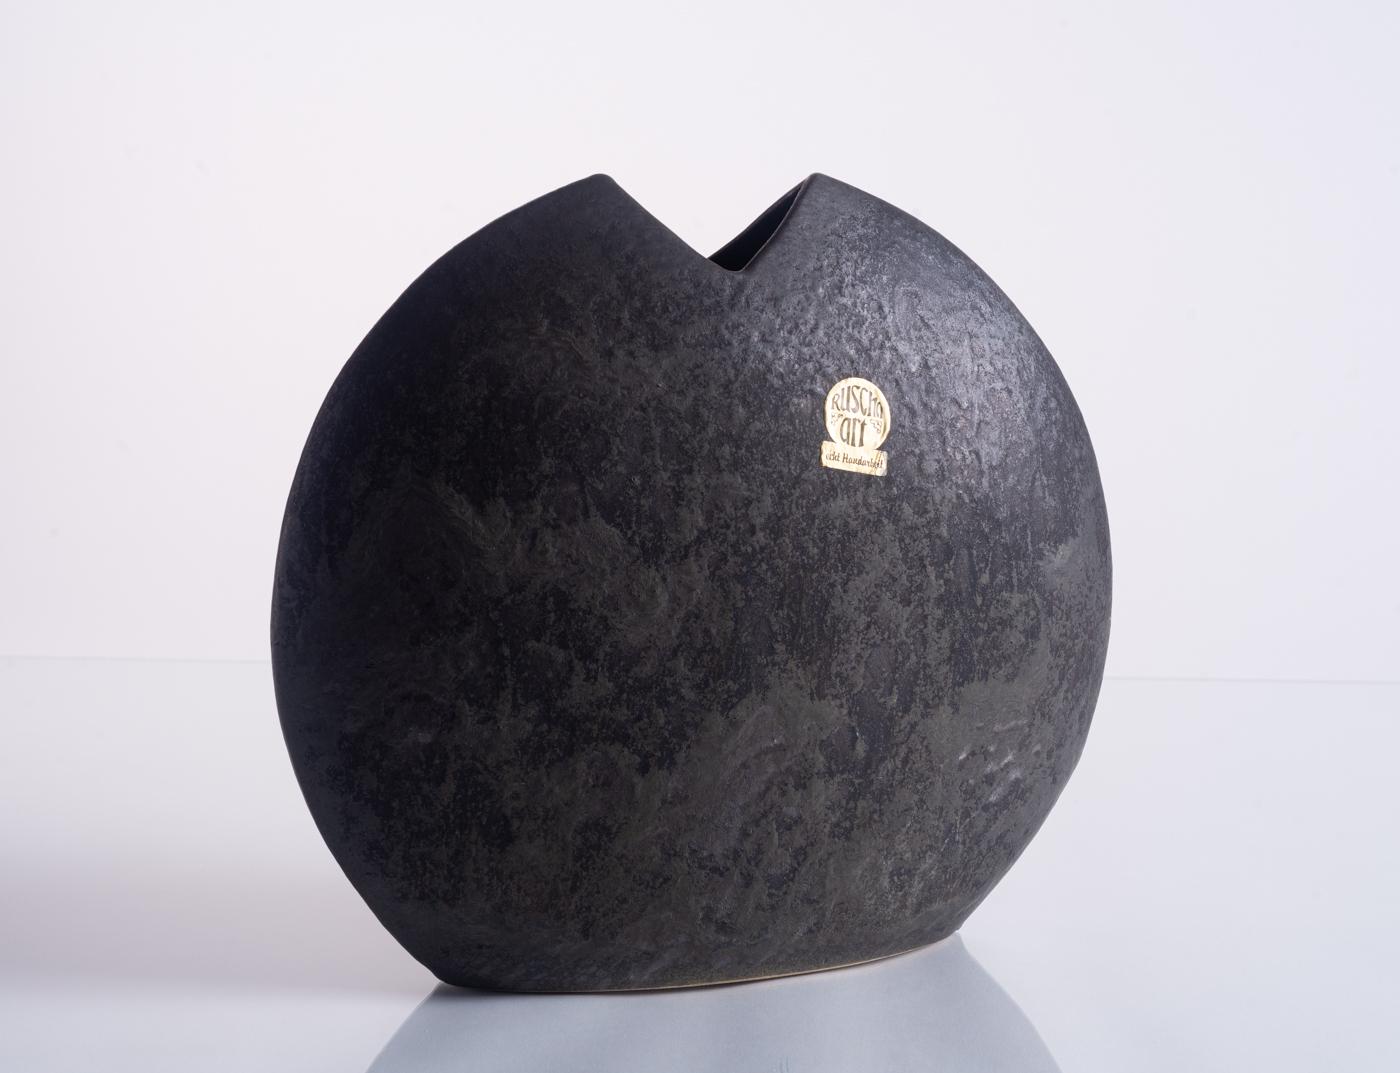 This Brutalist ceramic vase from Ruscha Keramik was charismatically called a Moonvase due to its circular shape, mottled texture, and deep purple, gray, and black glazing. Numbered in the base; the Ruscha Art sticker is original. Form A-1.

Ruscha